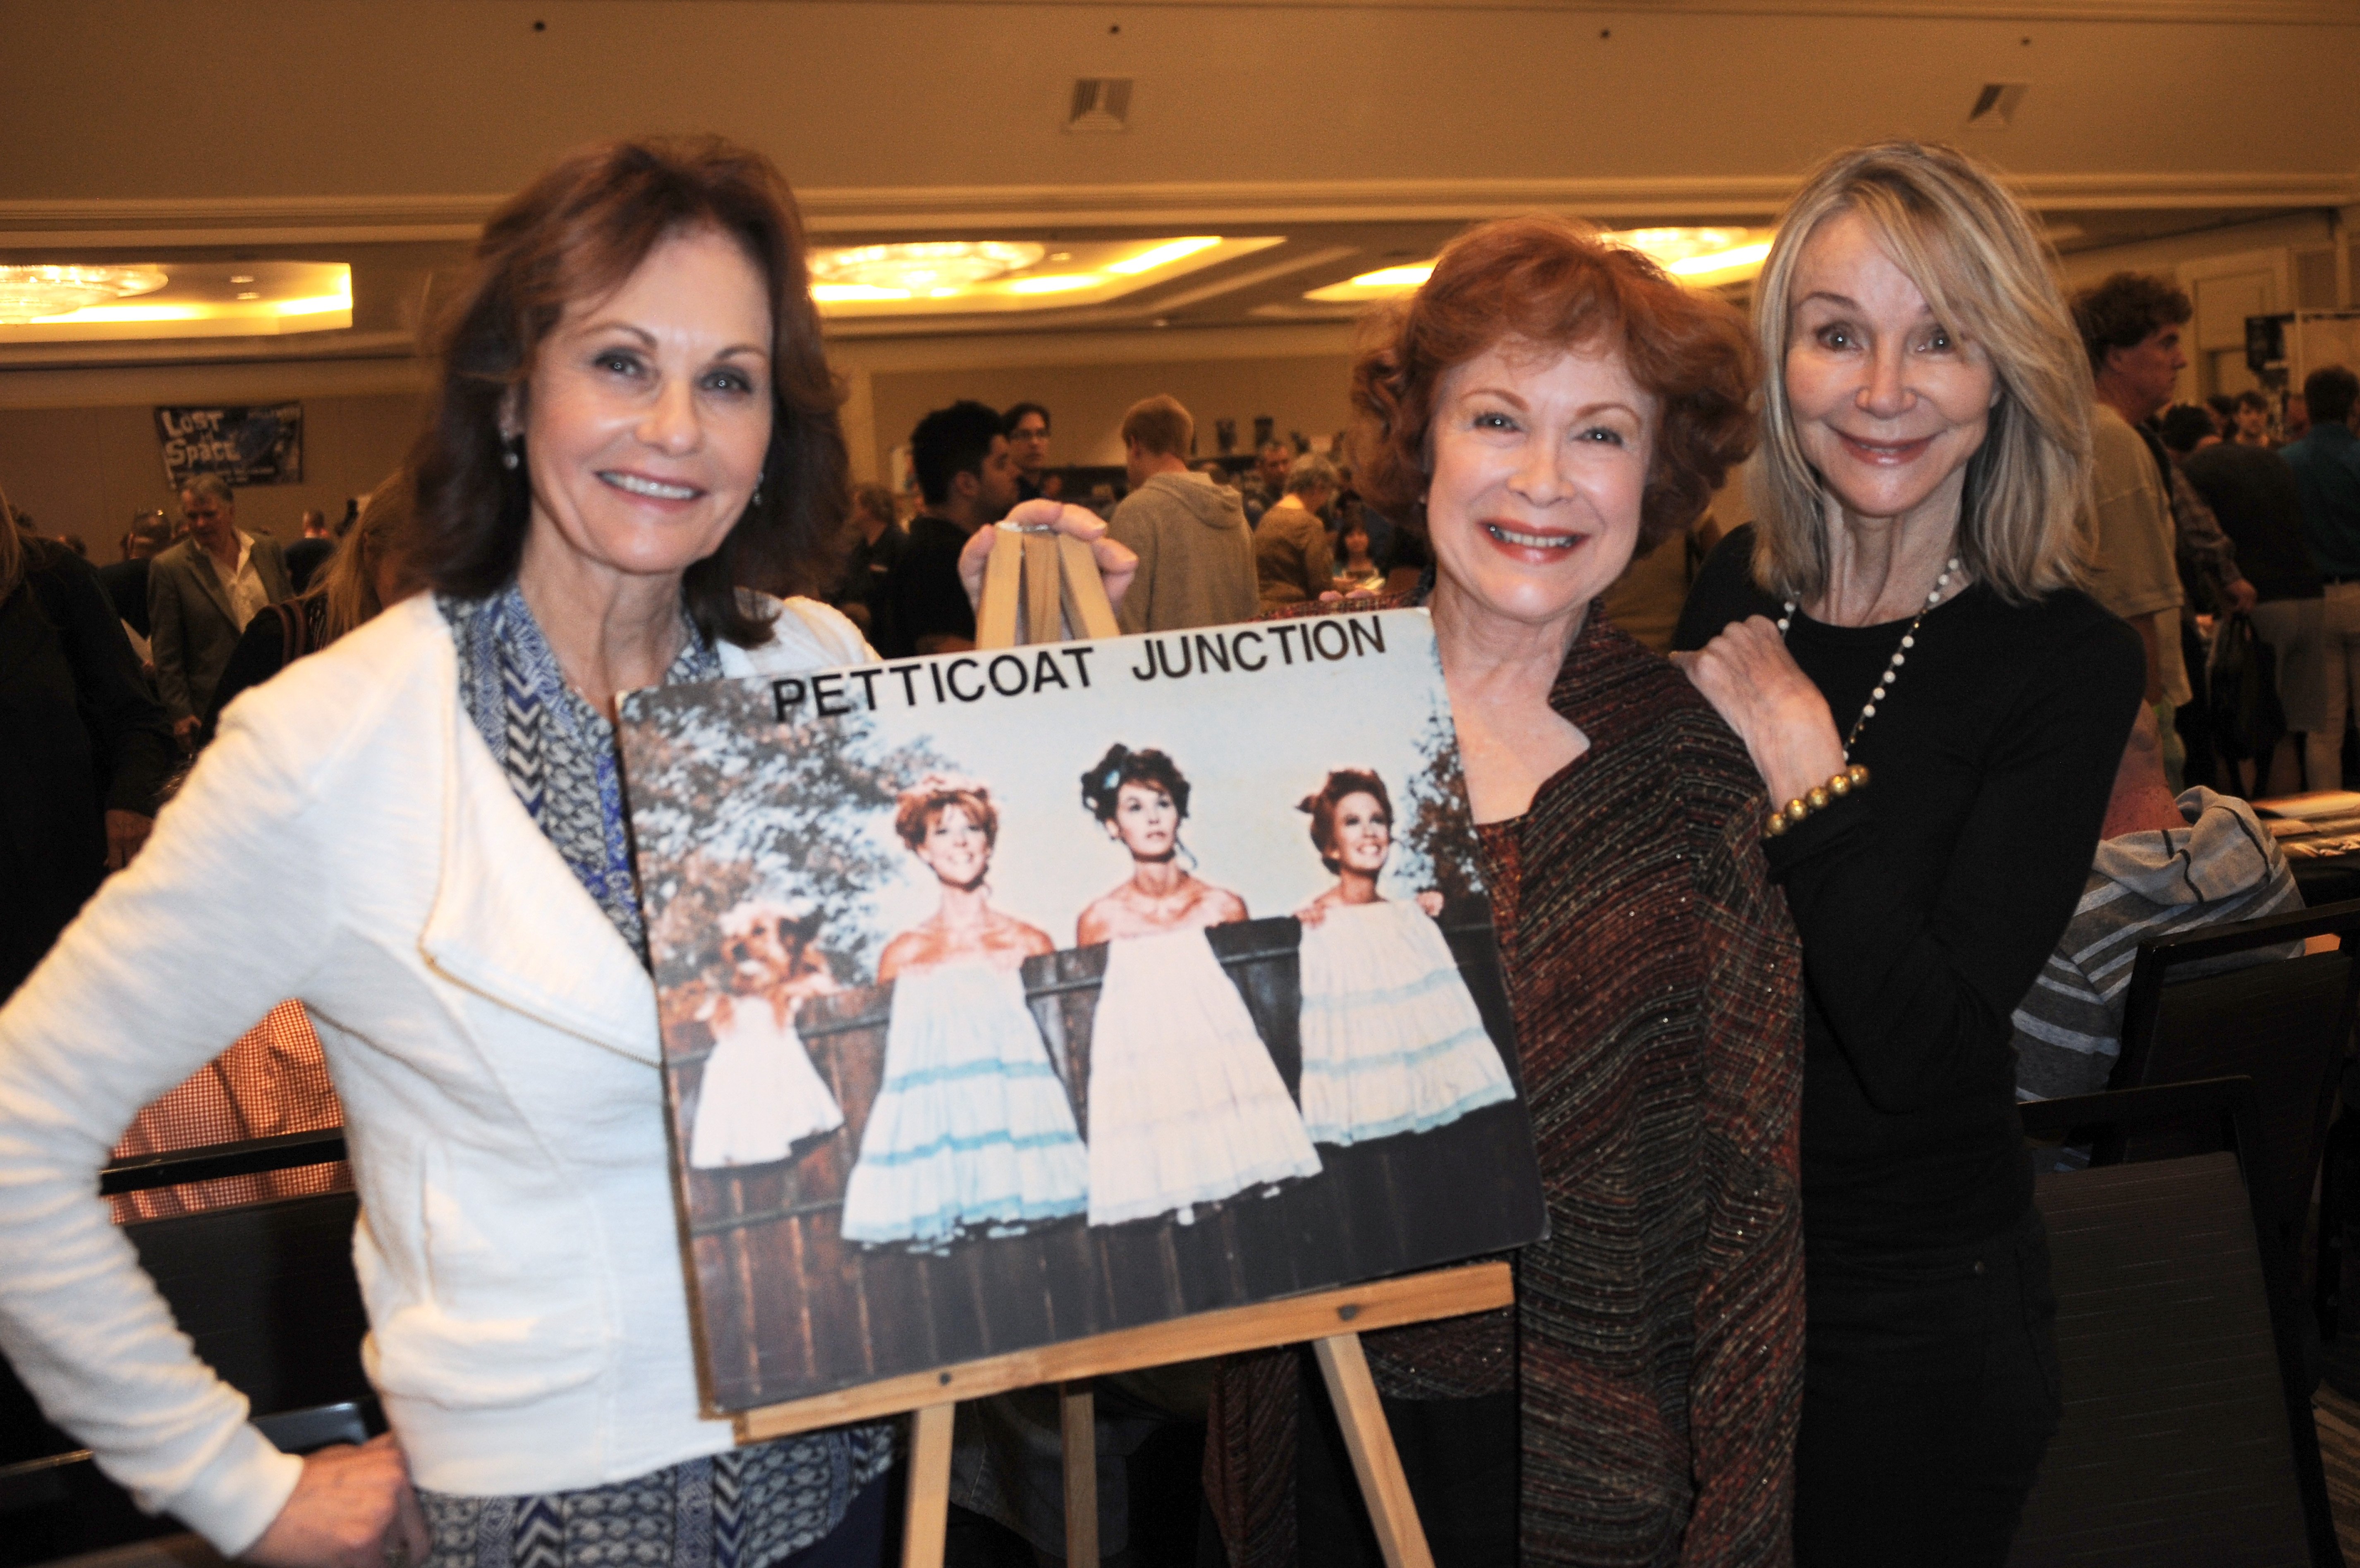 Actors from "Petticoat Junction" Lori Saunders, Linda Henning and Gunilla Hutton at The Hollywood Show  | Getty Images